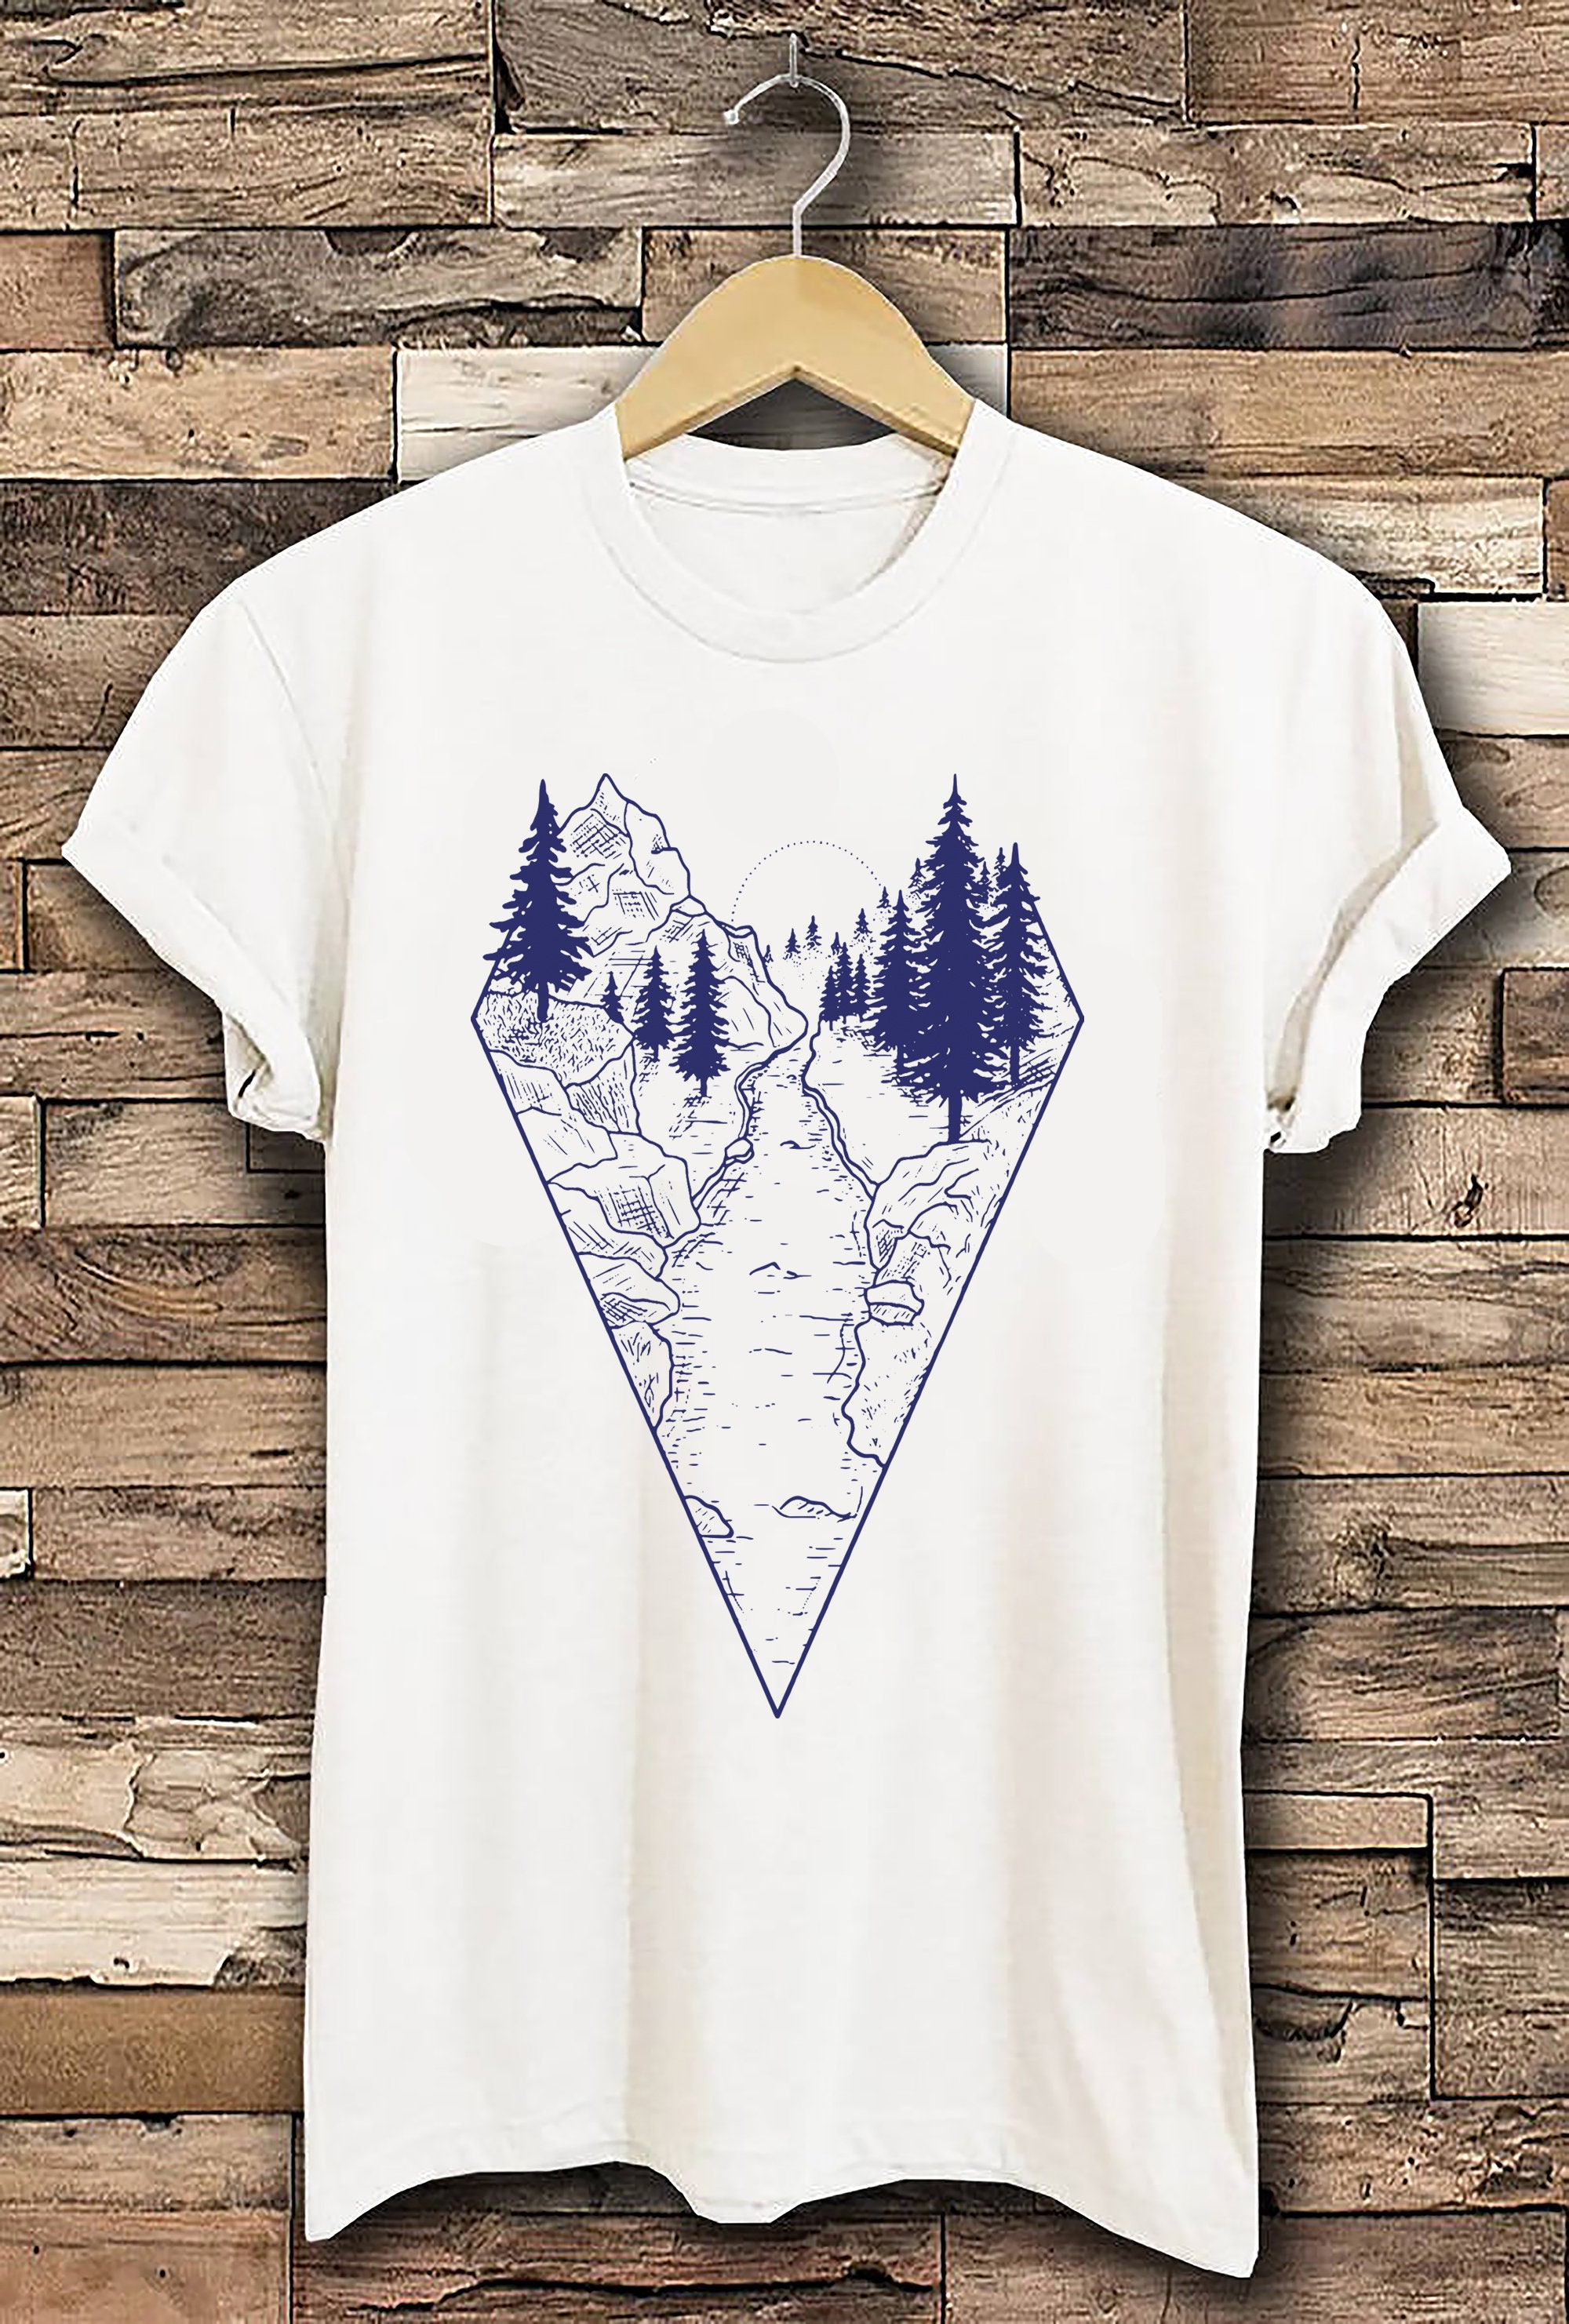 River Mountain Forest Nature T-Shirt Backpacking Shirt | Etsy